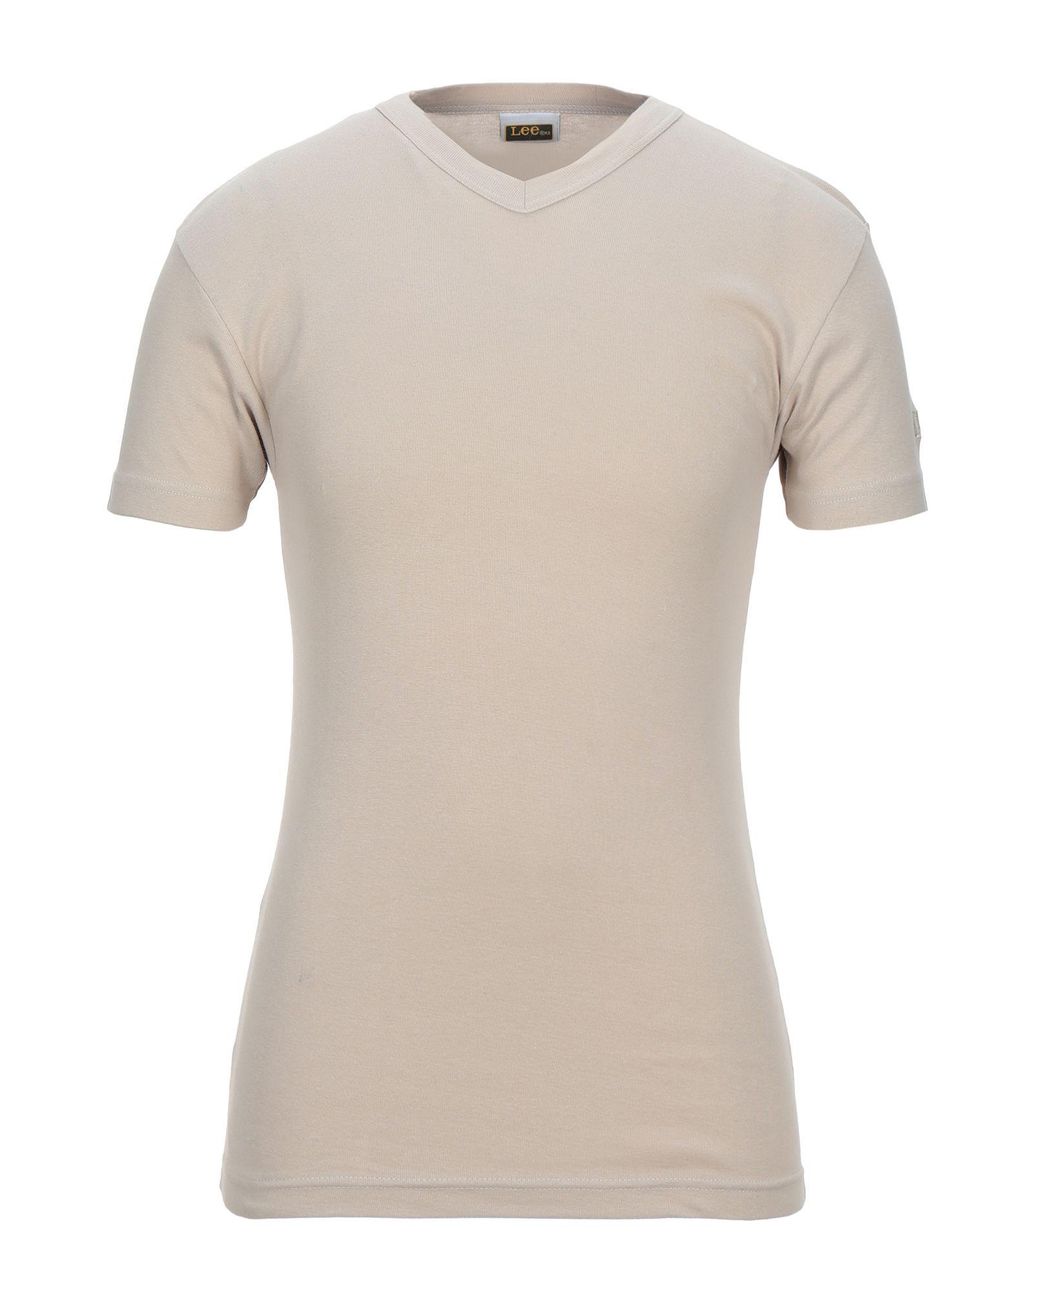 Lee Jeans Cotton T-shirt in Beige (Natural) for Men - Lyst